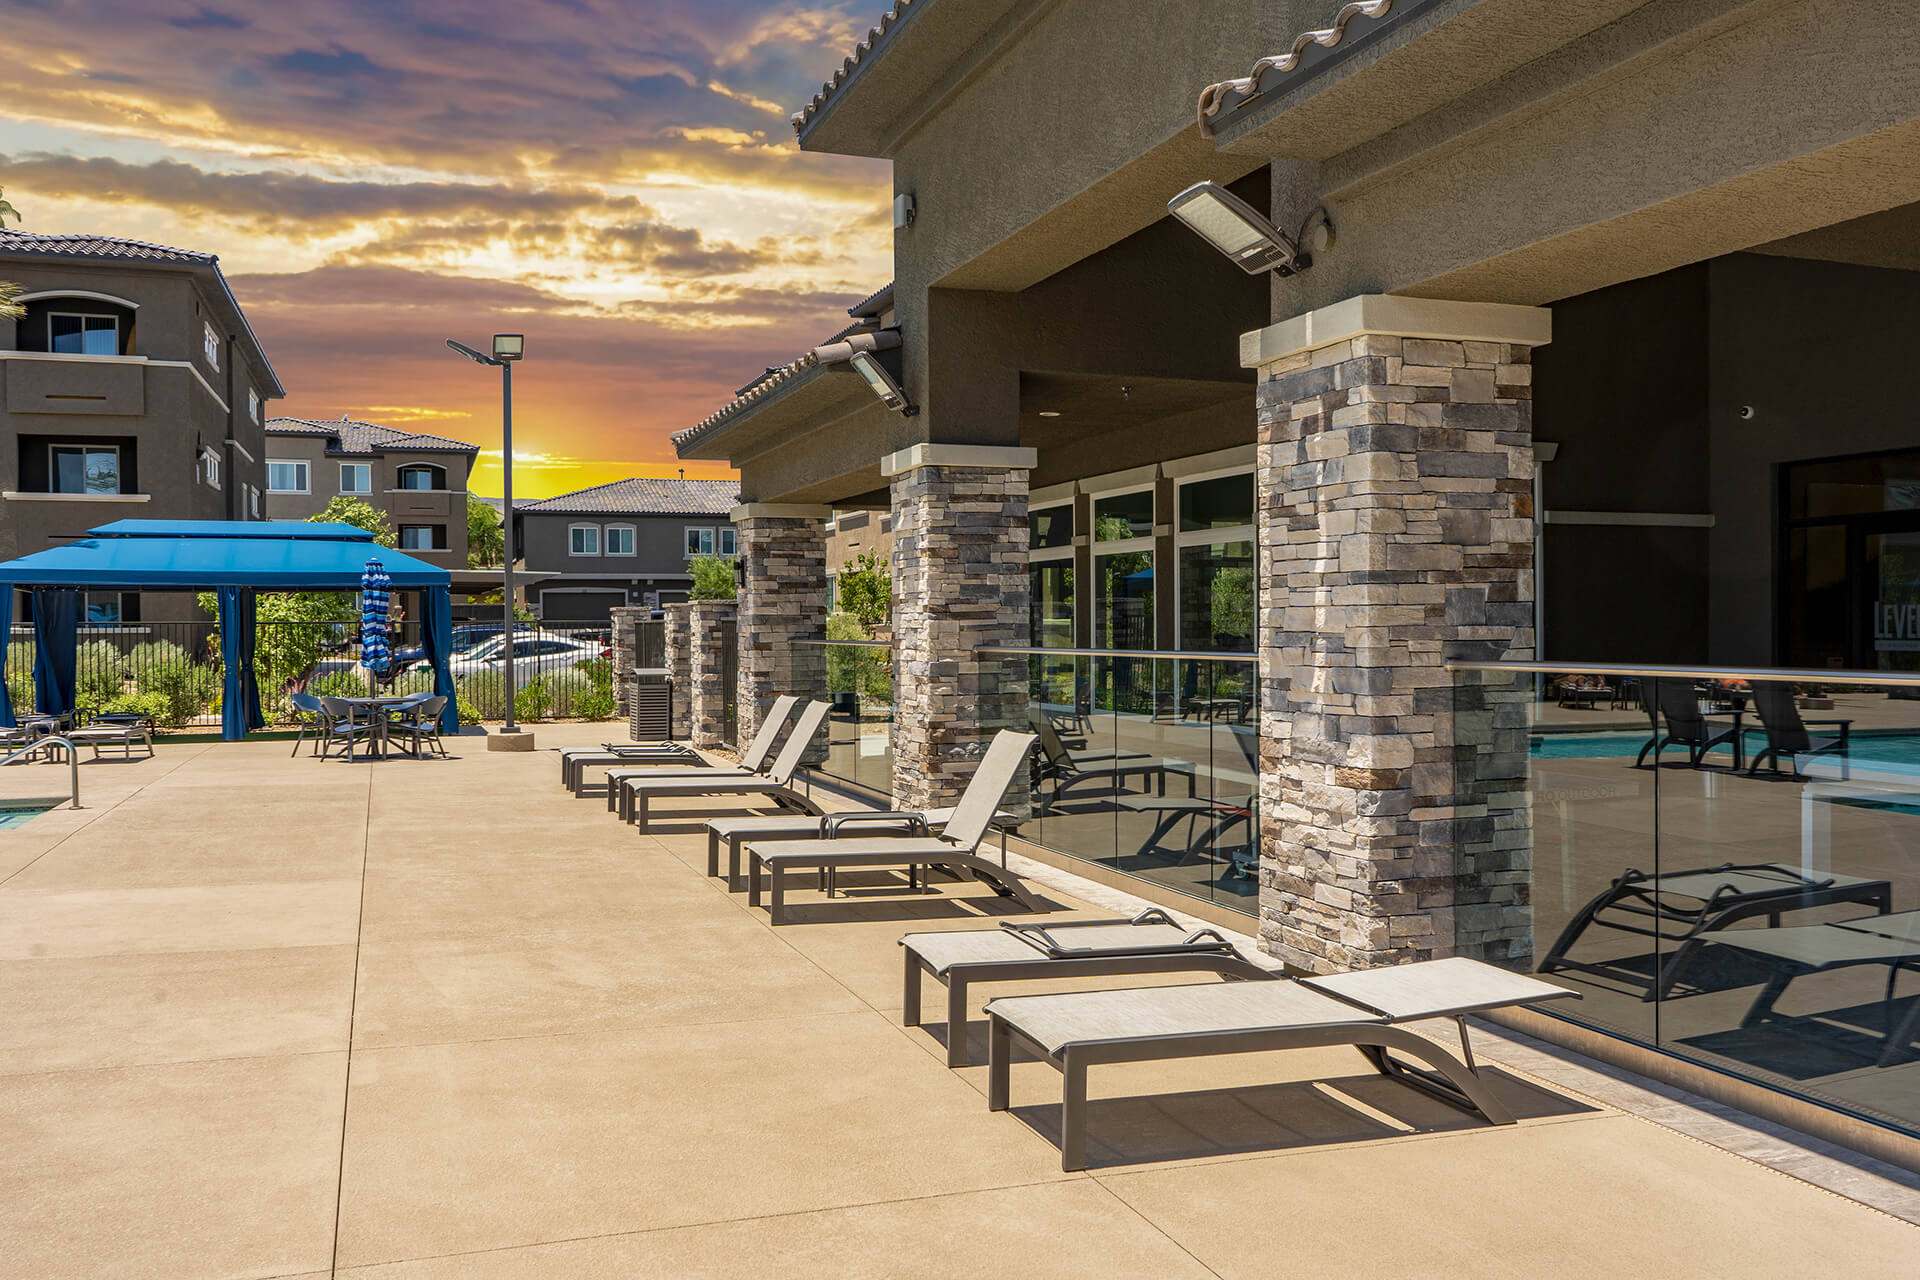 Level 25 Poolside Cabanas by Metro Awnings